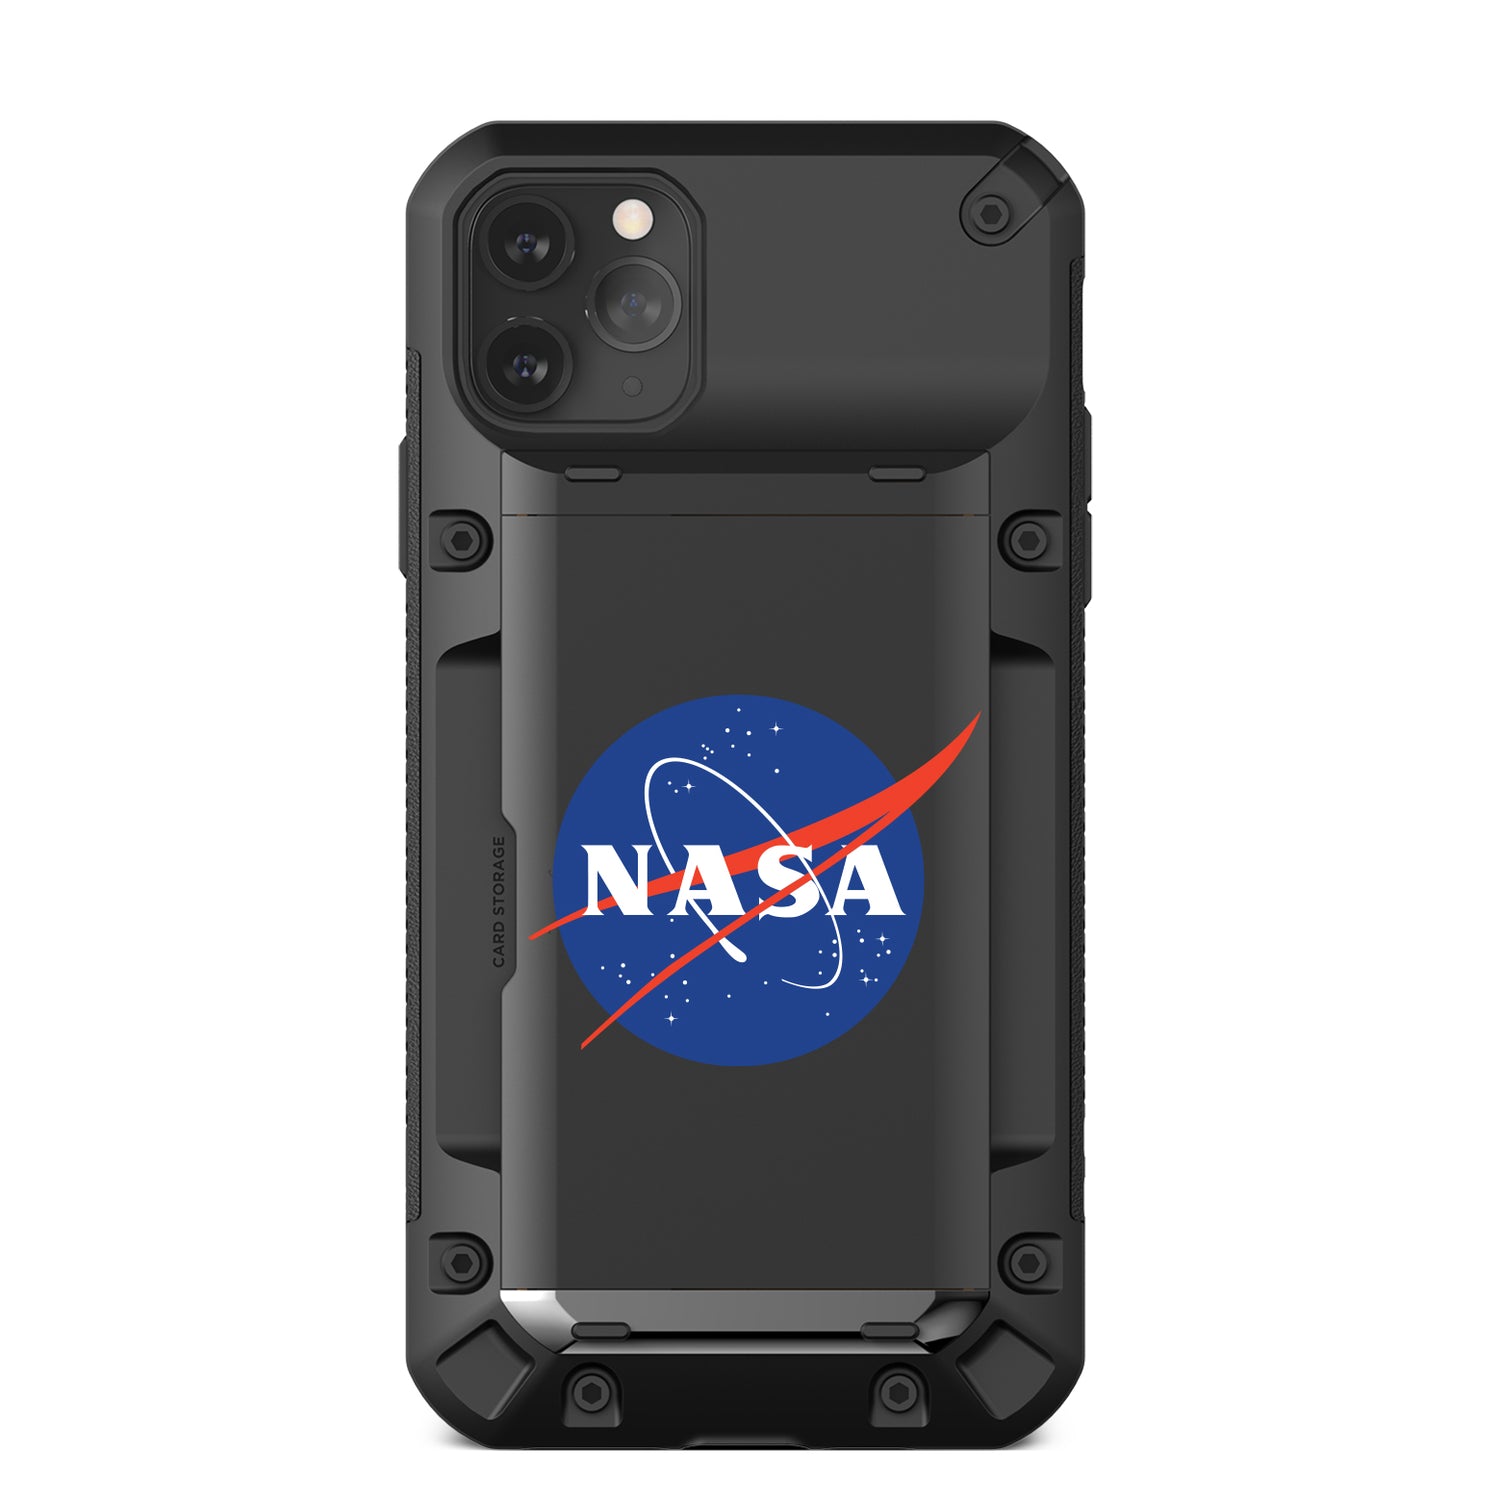 iPhone 11 Pro Max Case Damda Glide Pro NASA High quality TPU material Body and Real Metal Stripe for extreme drop protectionSufficient 3-4 card tough storage that heavily limits wireless charging.